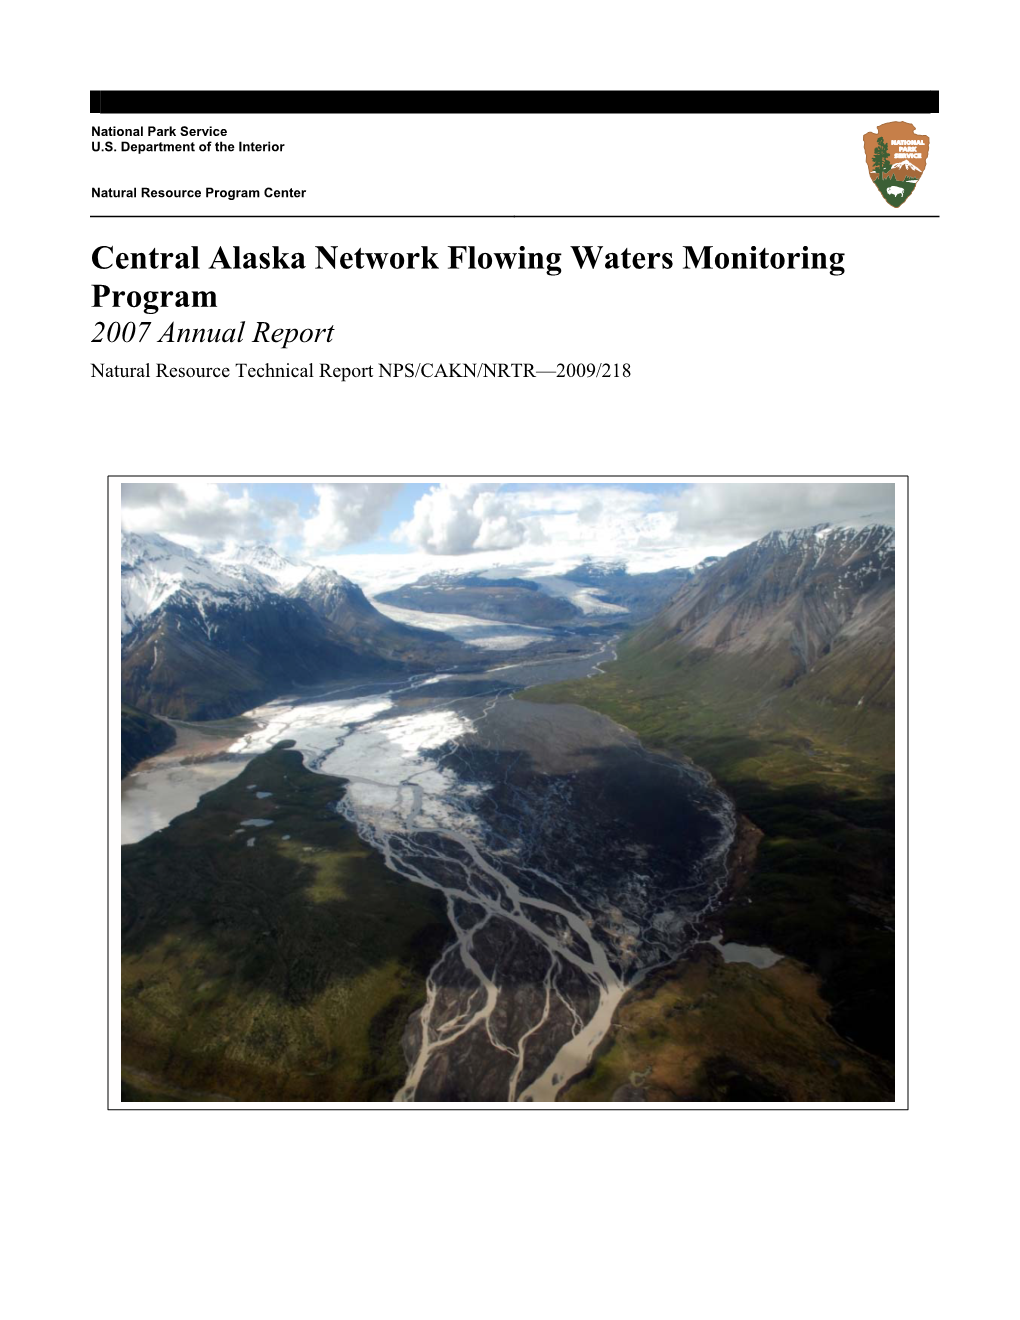 Central Alaska Network Flowing Waters Monitoring Program 2007 Annual Report Natural Resource Technical Report NPS/CAKN/NRTR—2009/218